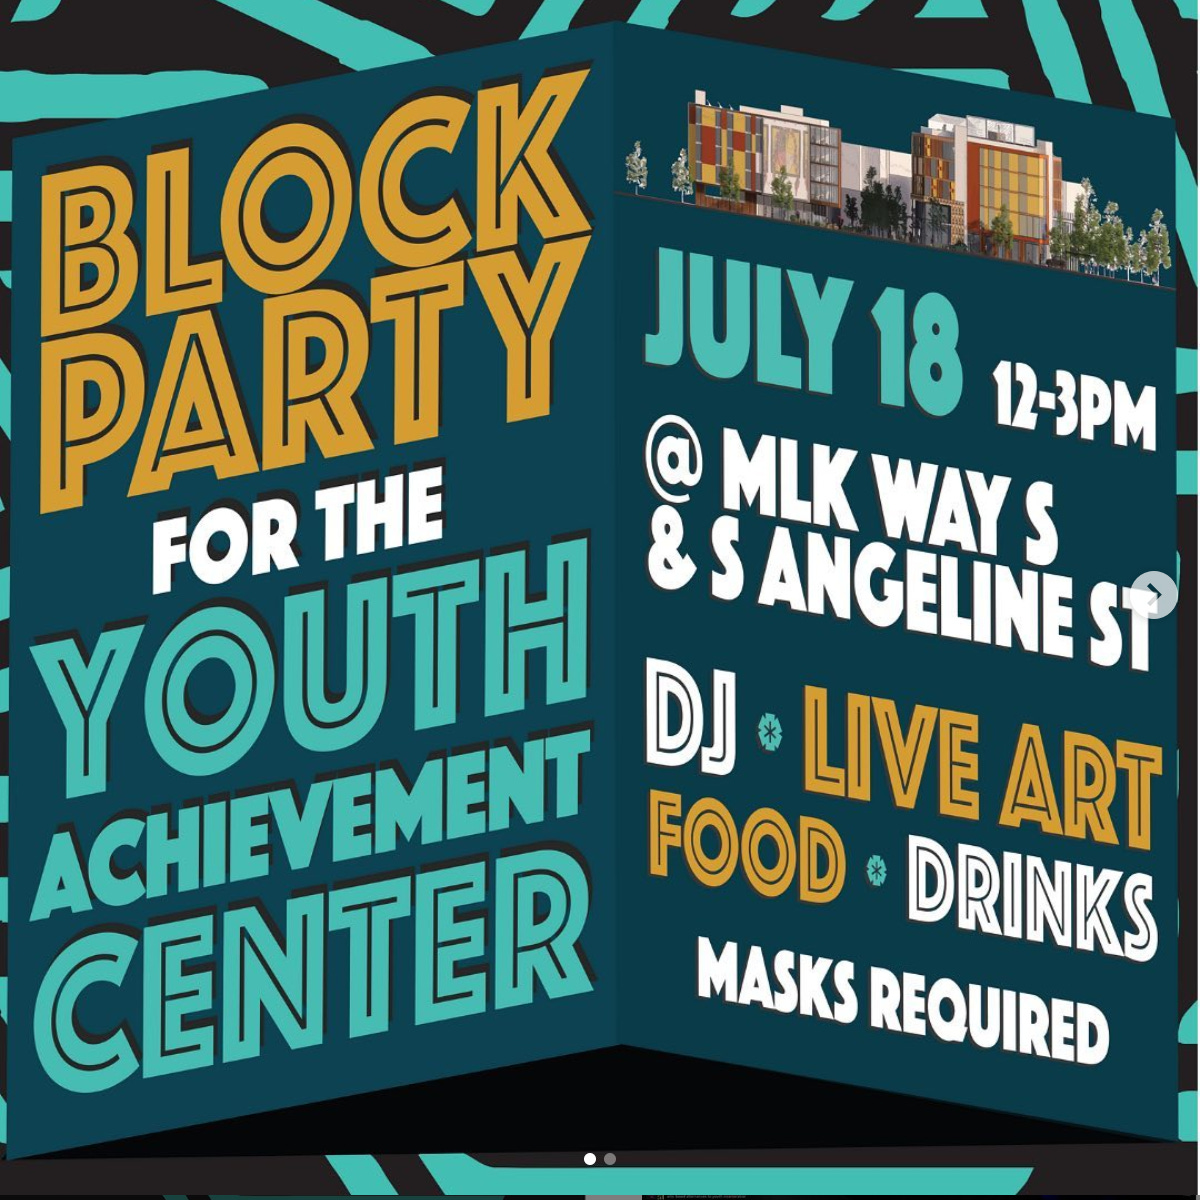 Block Party for the Youth Achievement Center. July 18 from 12-3pm @ MLK Way S & S Angeline St. DJ, Live art, Food, Drinks. Masks required.